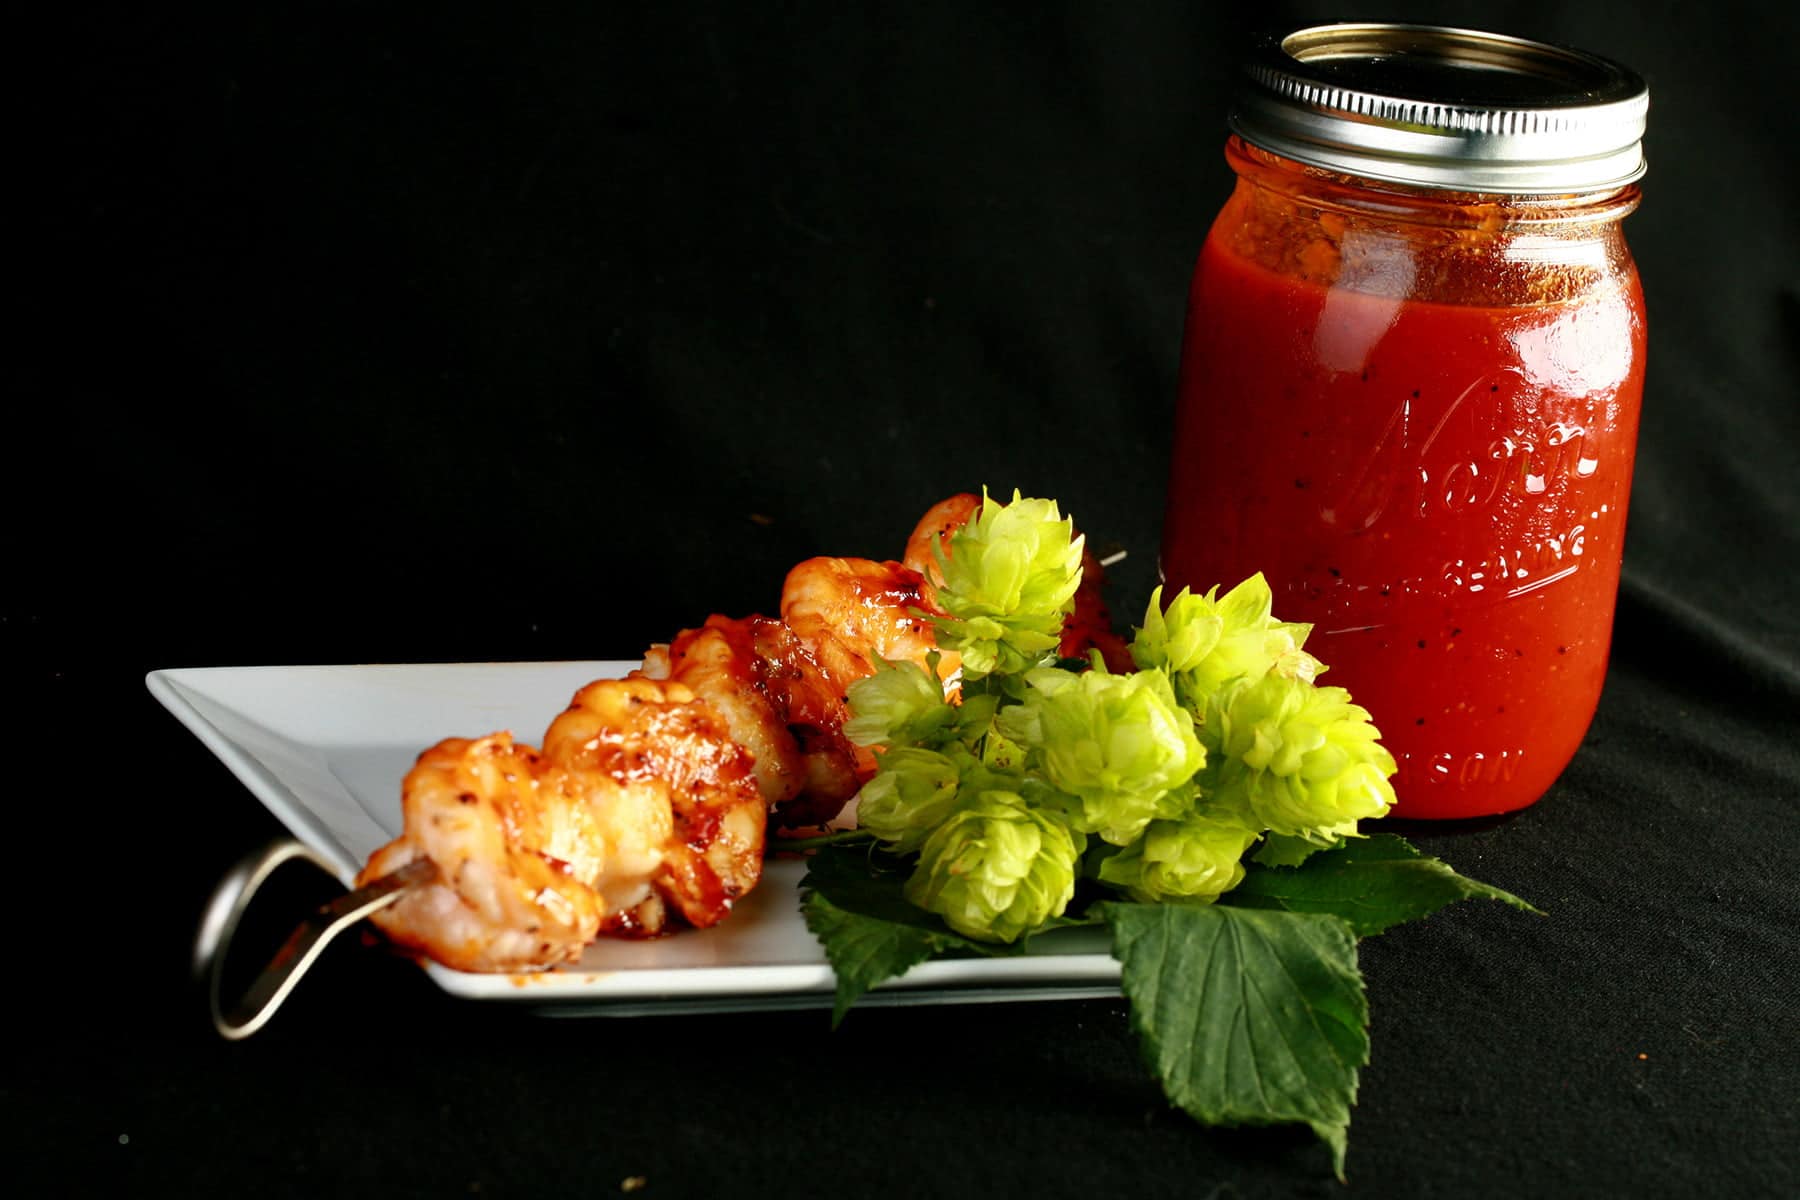 A jar of hoppy IPA BBQ Sauce, next to some fresh hops, and a plate with a skewer of grilled shrimp on it.